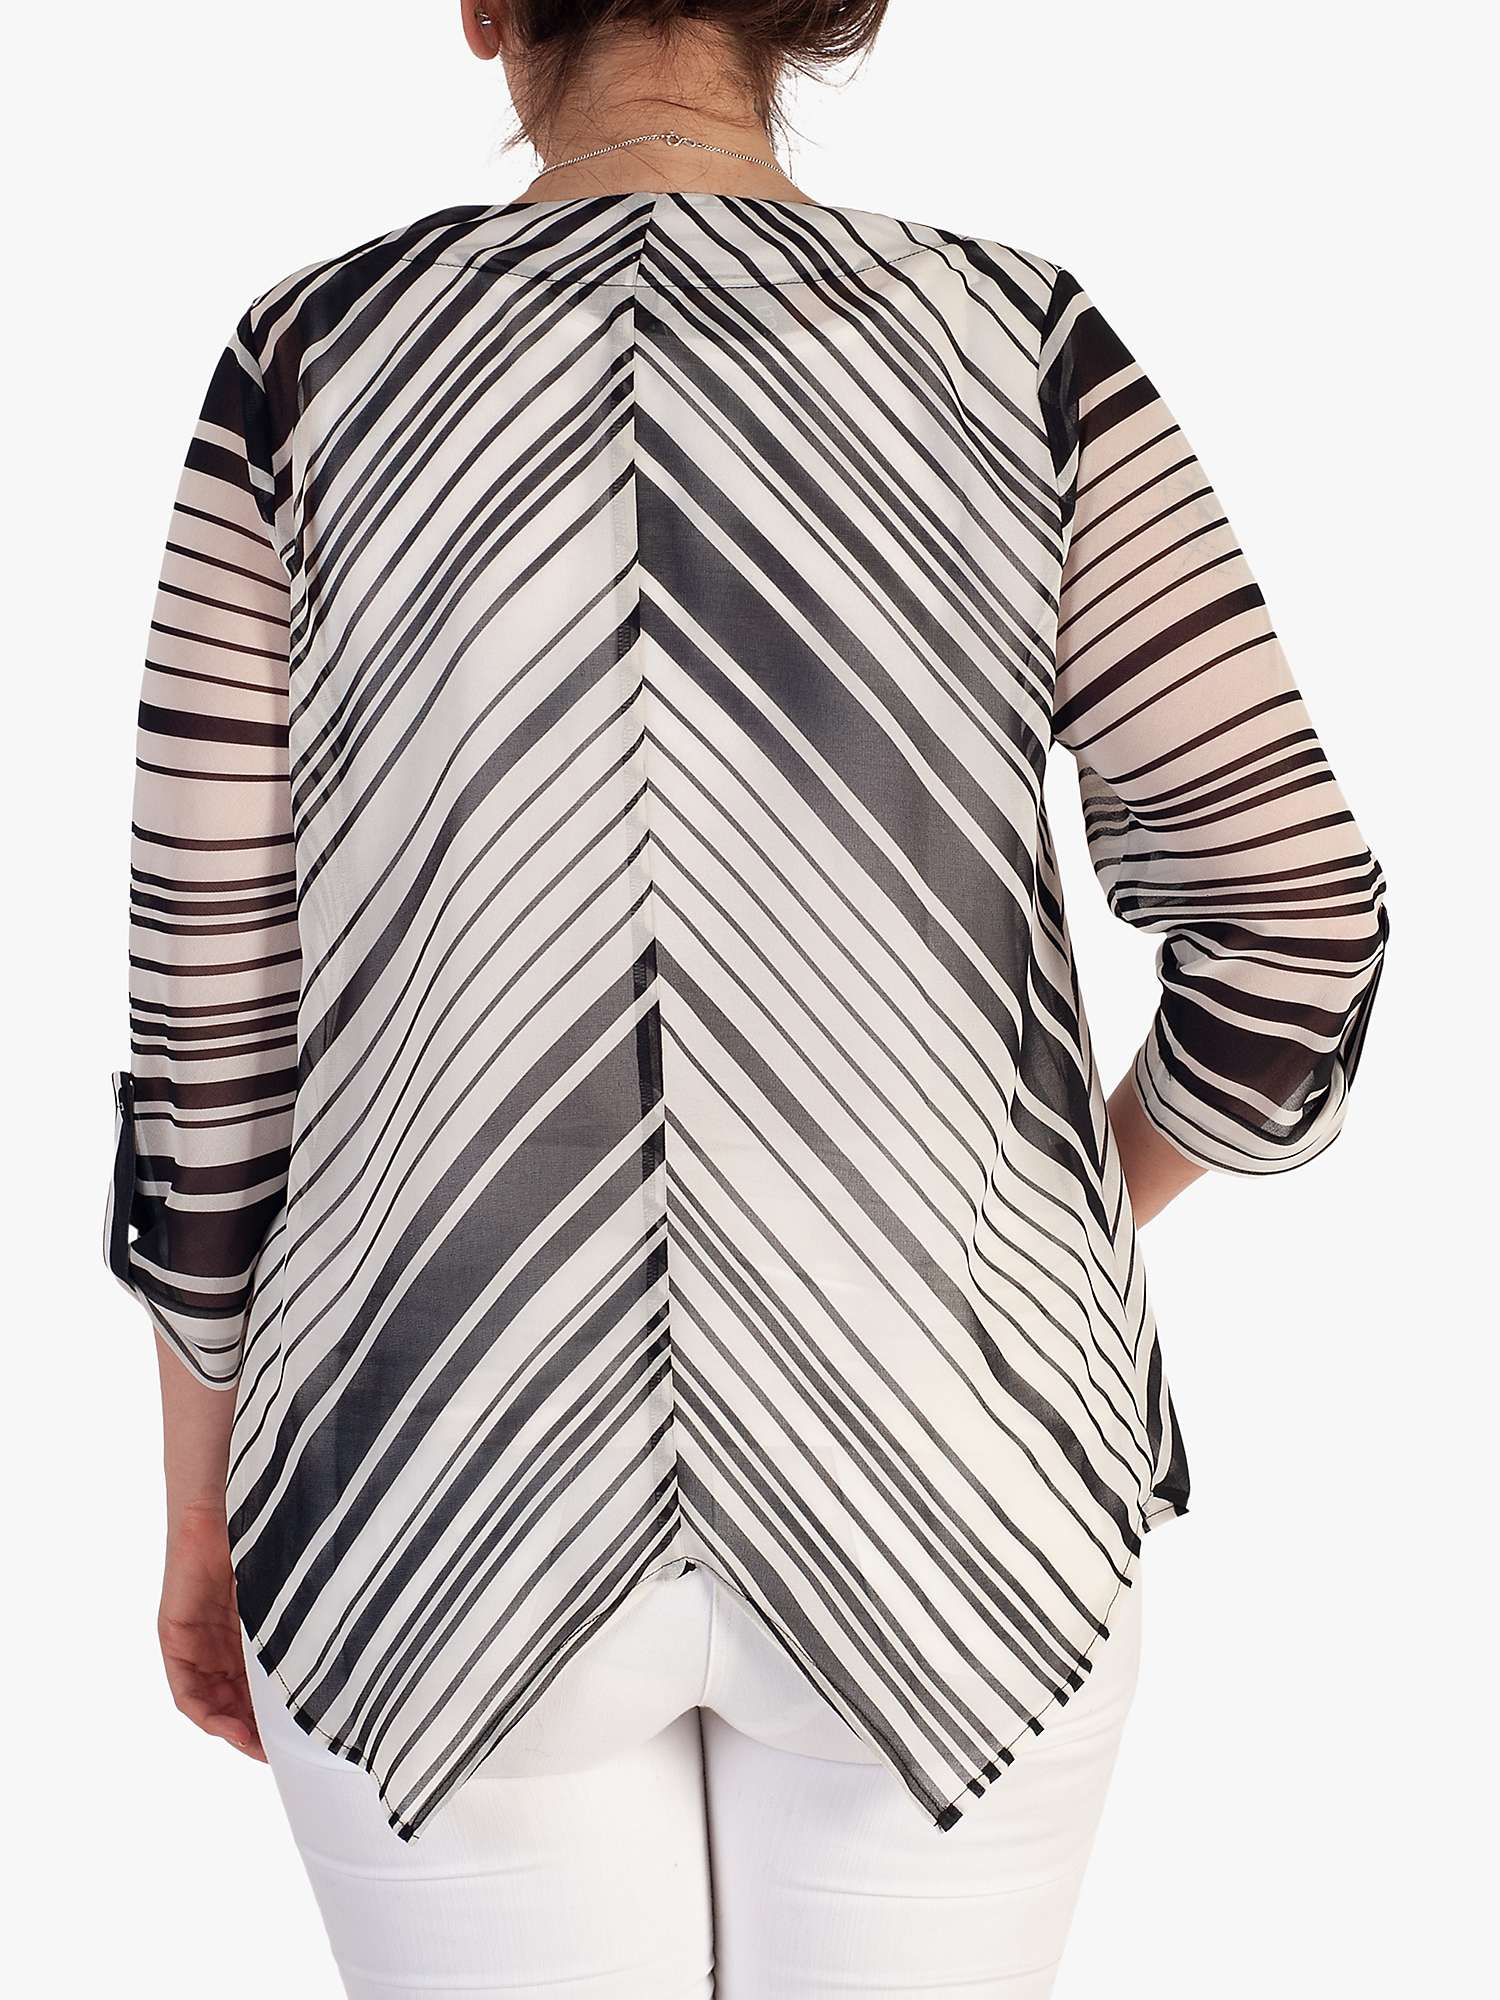 Buy chesca Striped V-Neck Tunic Top, Ivory/Black Online at johnlewis.com